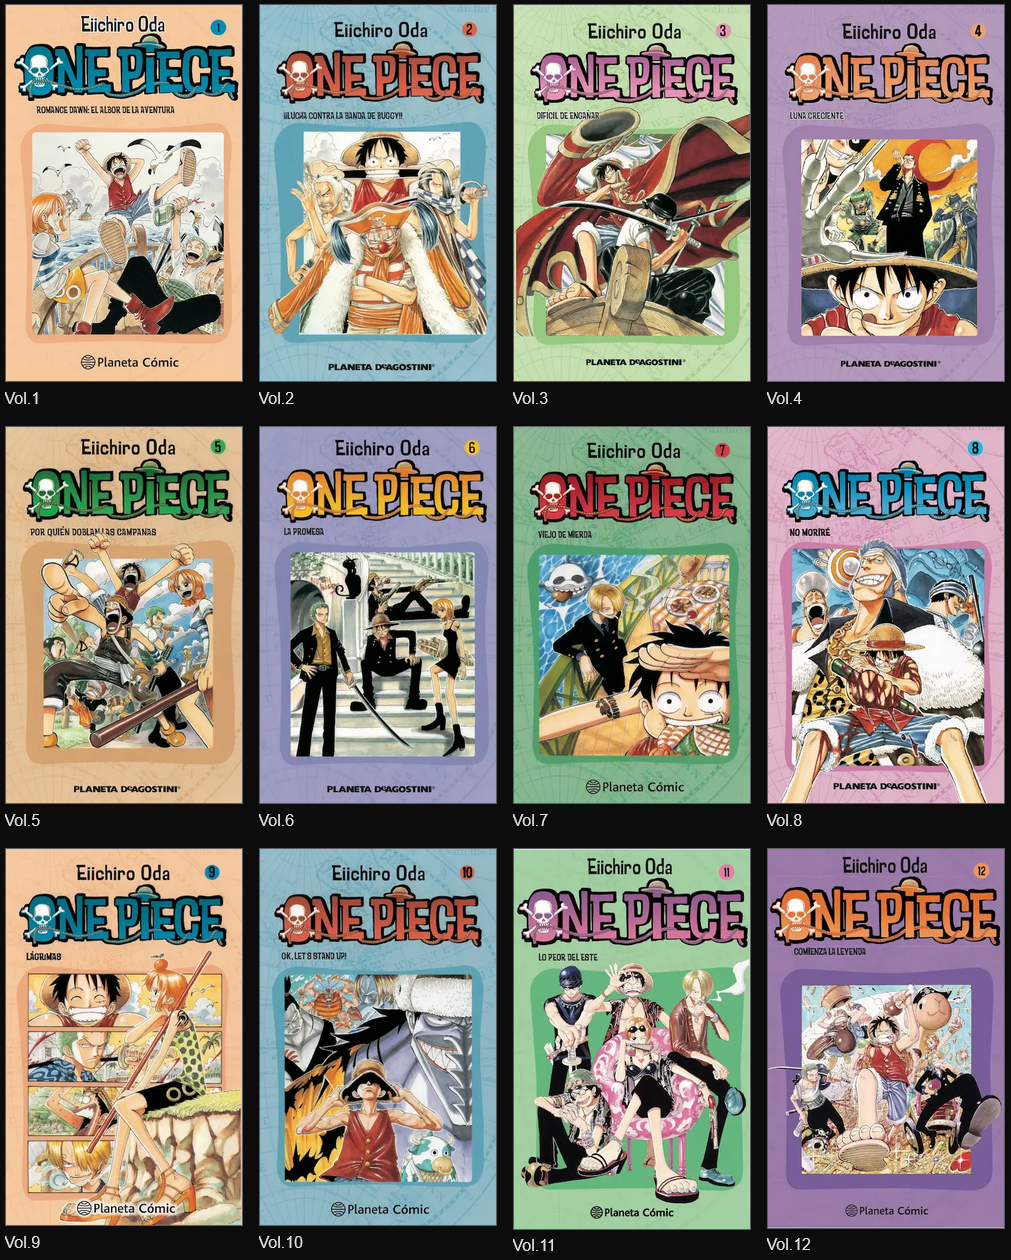 Courtesy of Shueisha, 'One Piece' fans old and new can now enjoy the series' first 12 volumes completely free-of-charge.